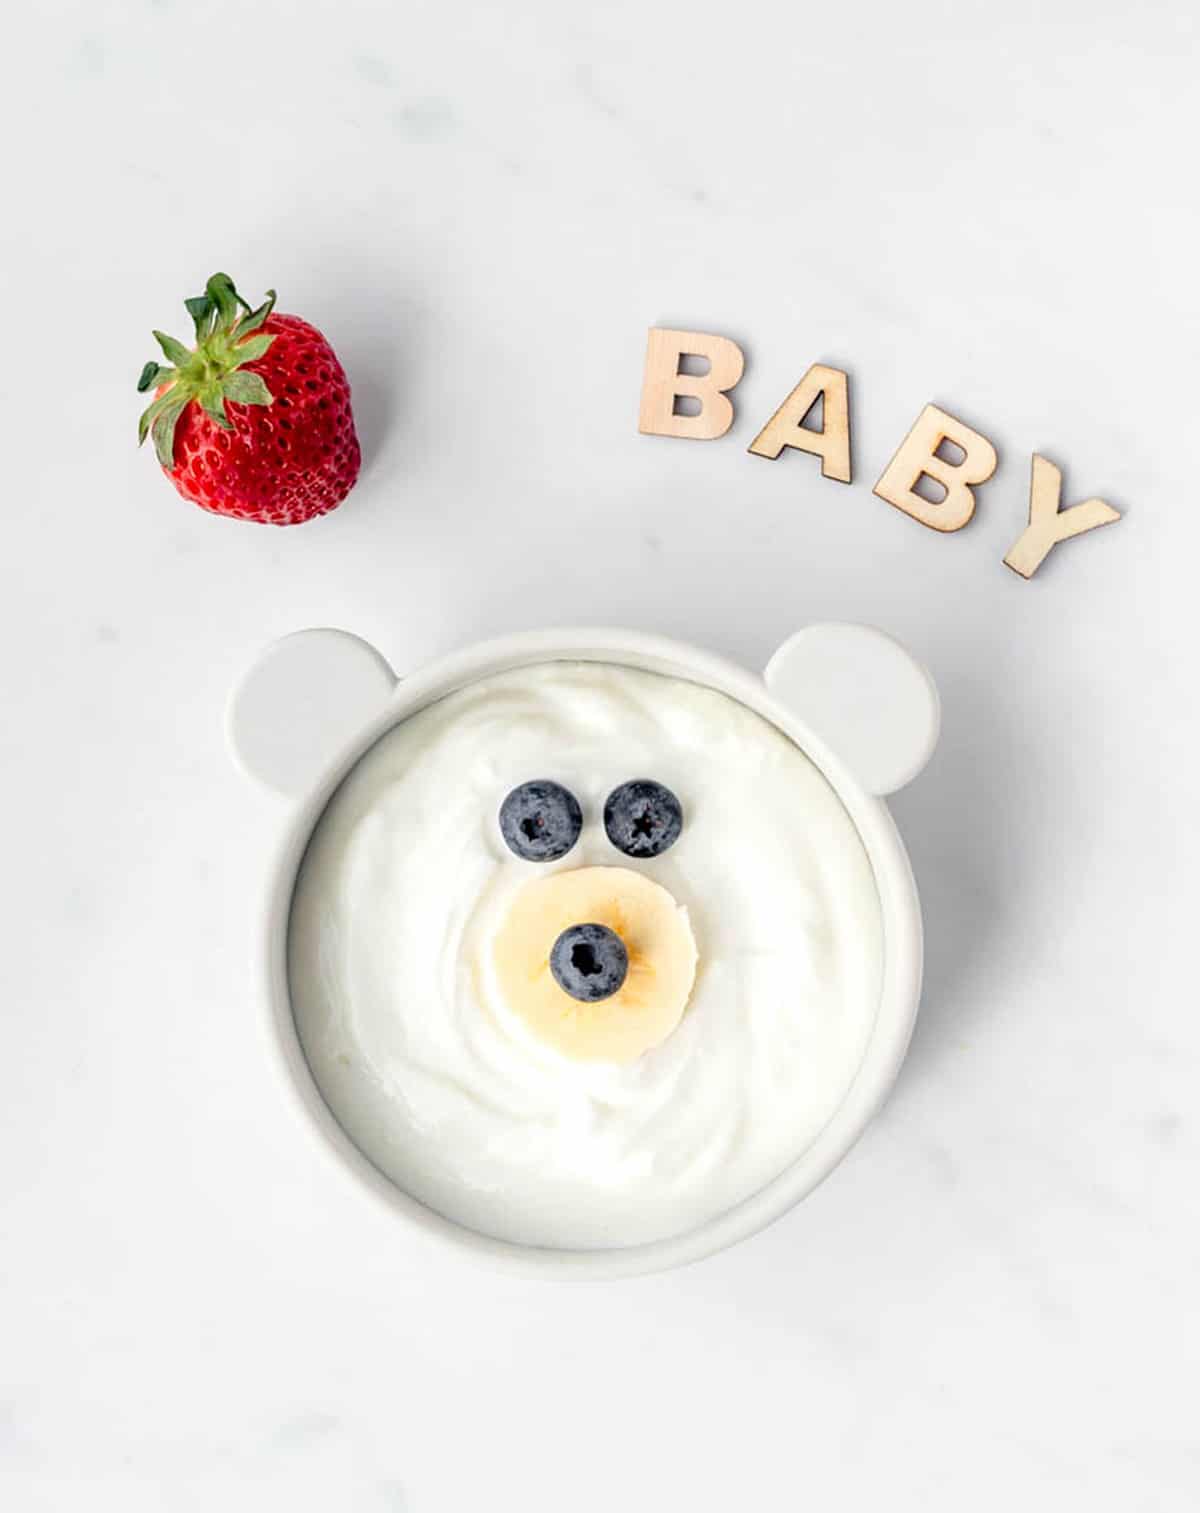 A teddy bear bowl filled with yogurt with a strawberry and word baby spelled out next to it.